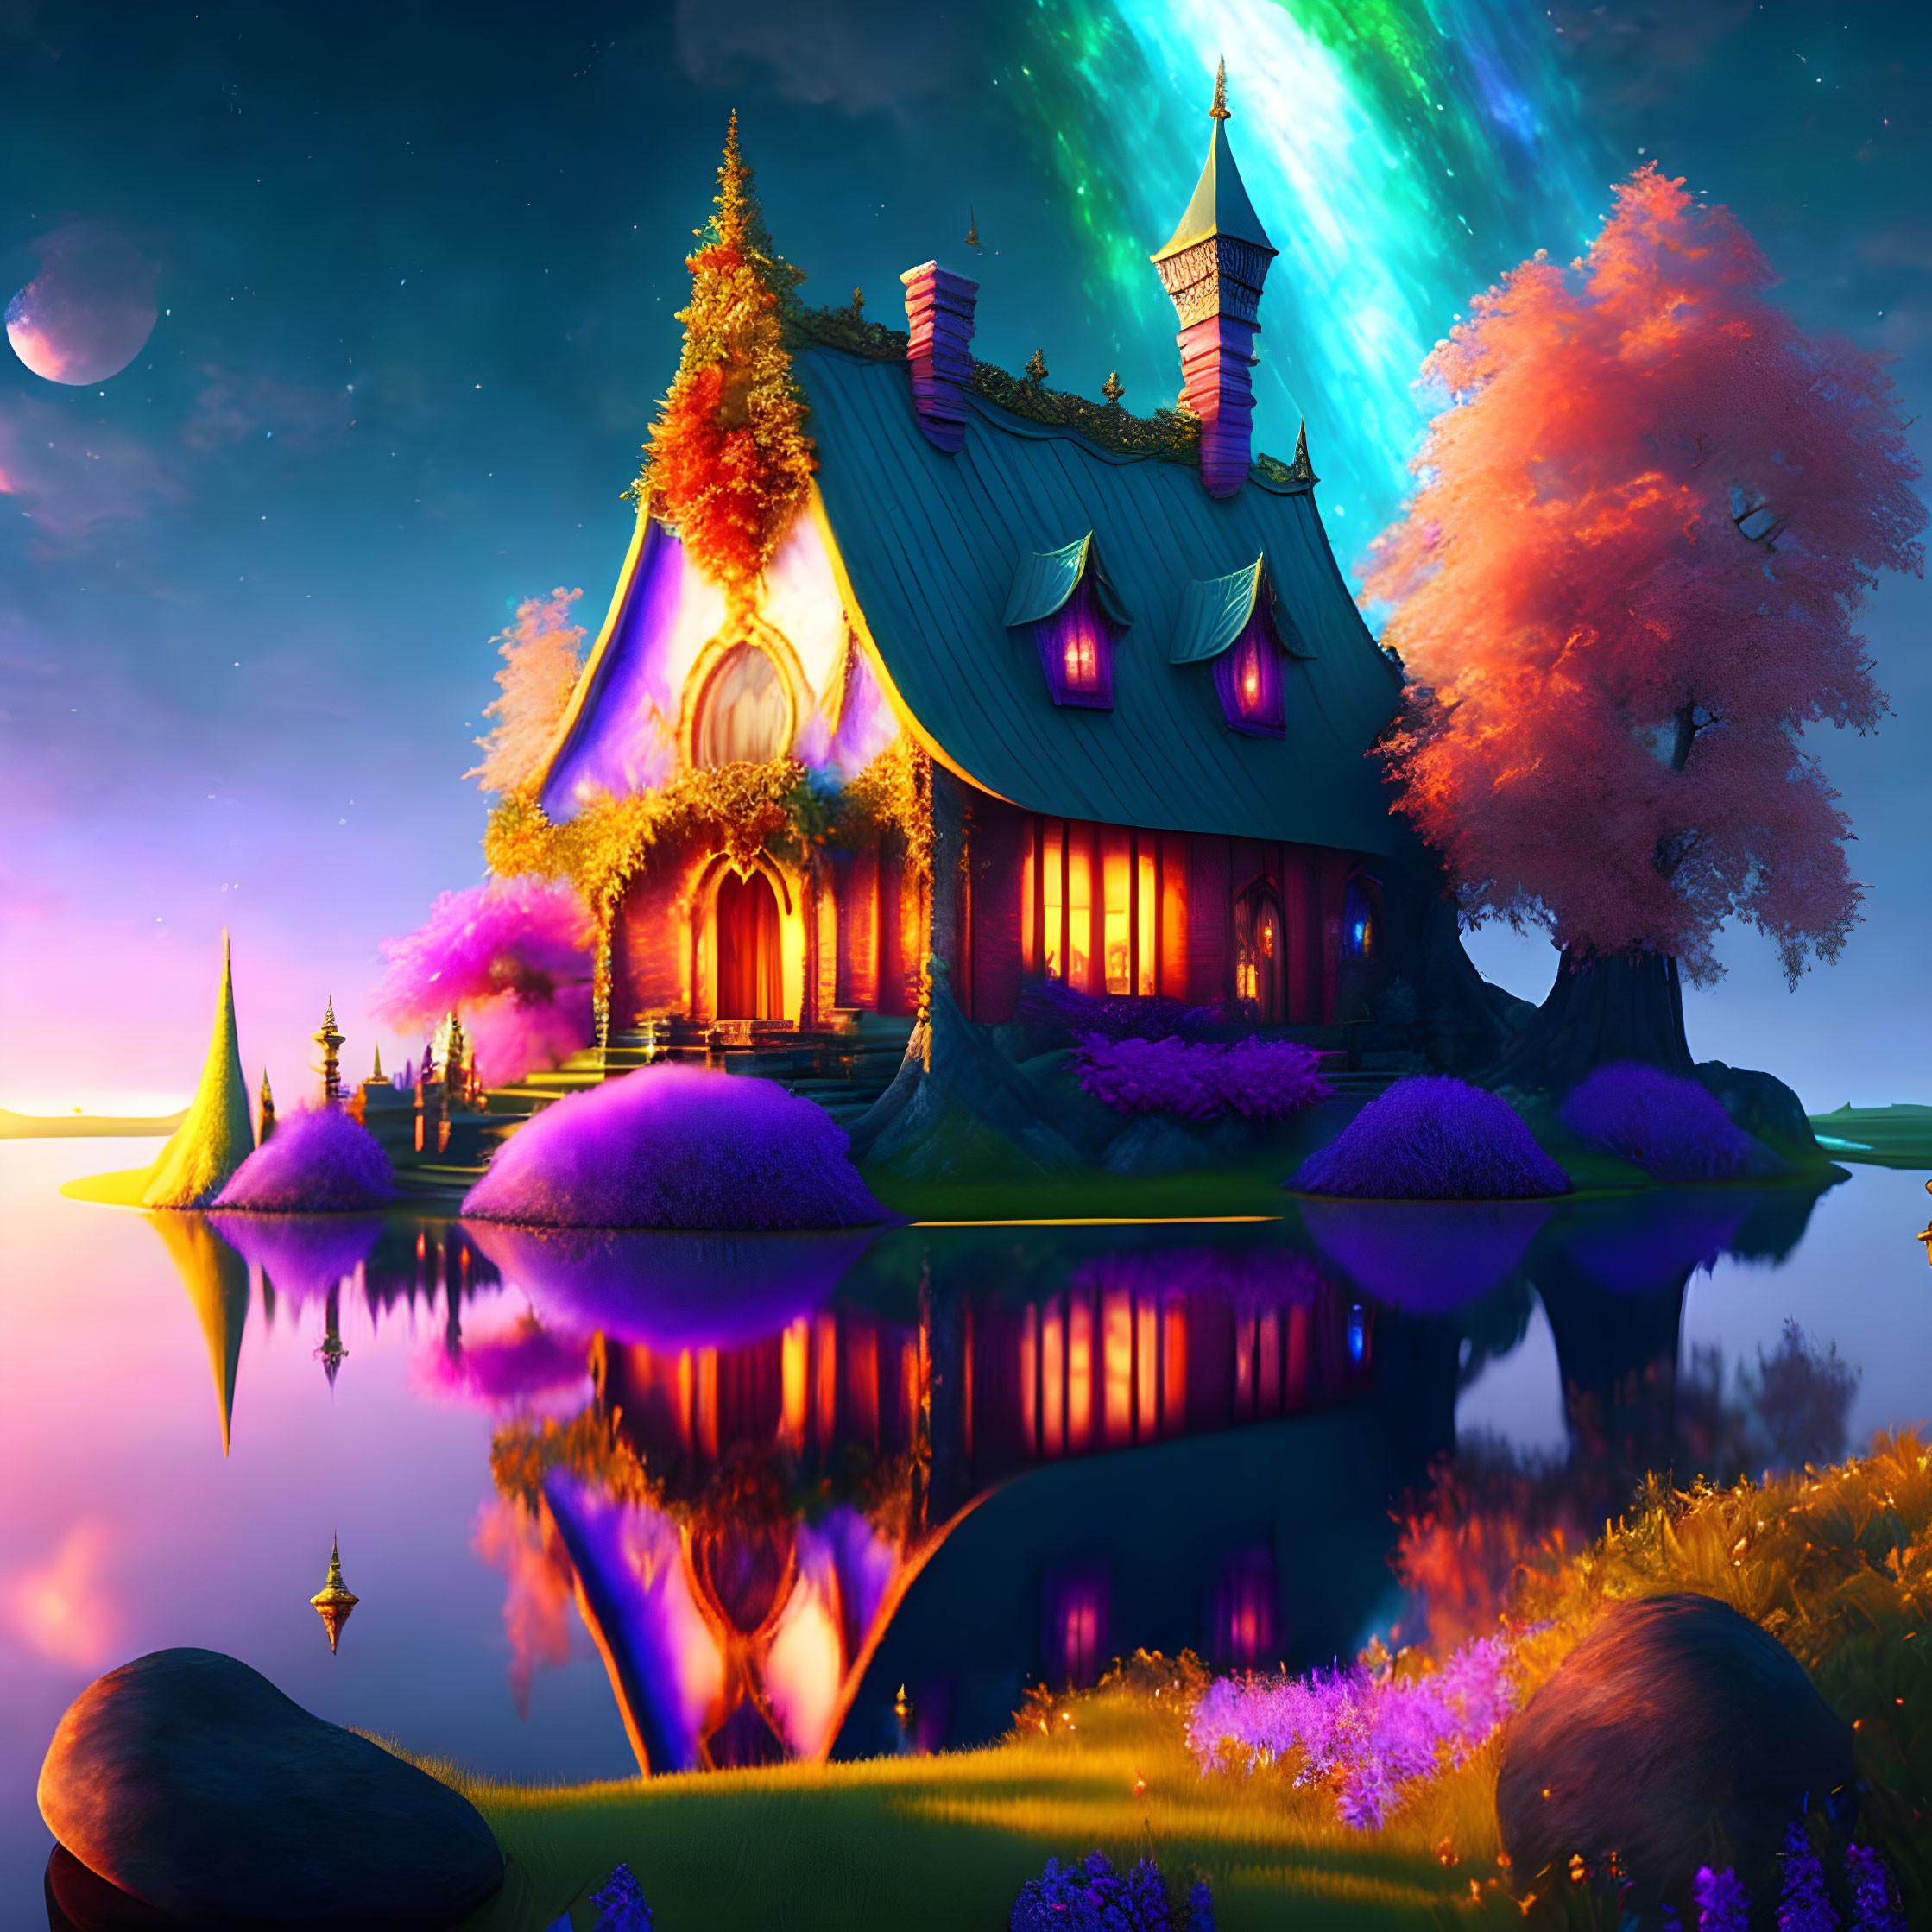 Fantasy cottage by reflective lake under aurora and night sky